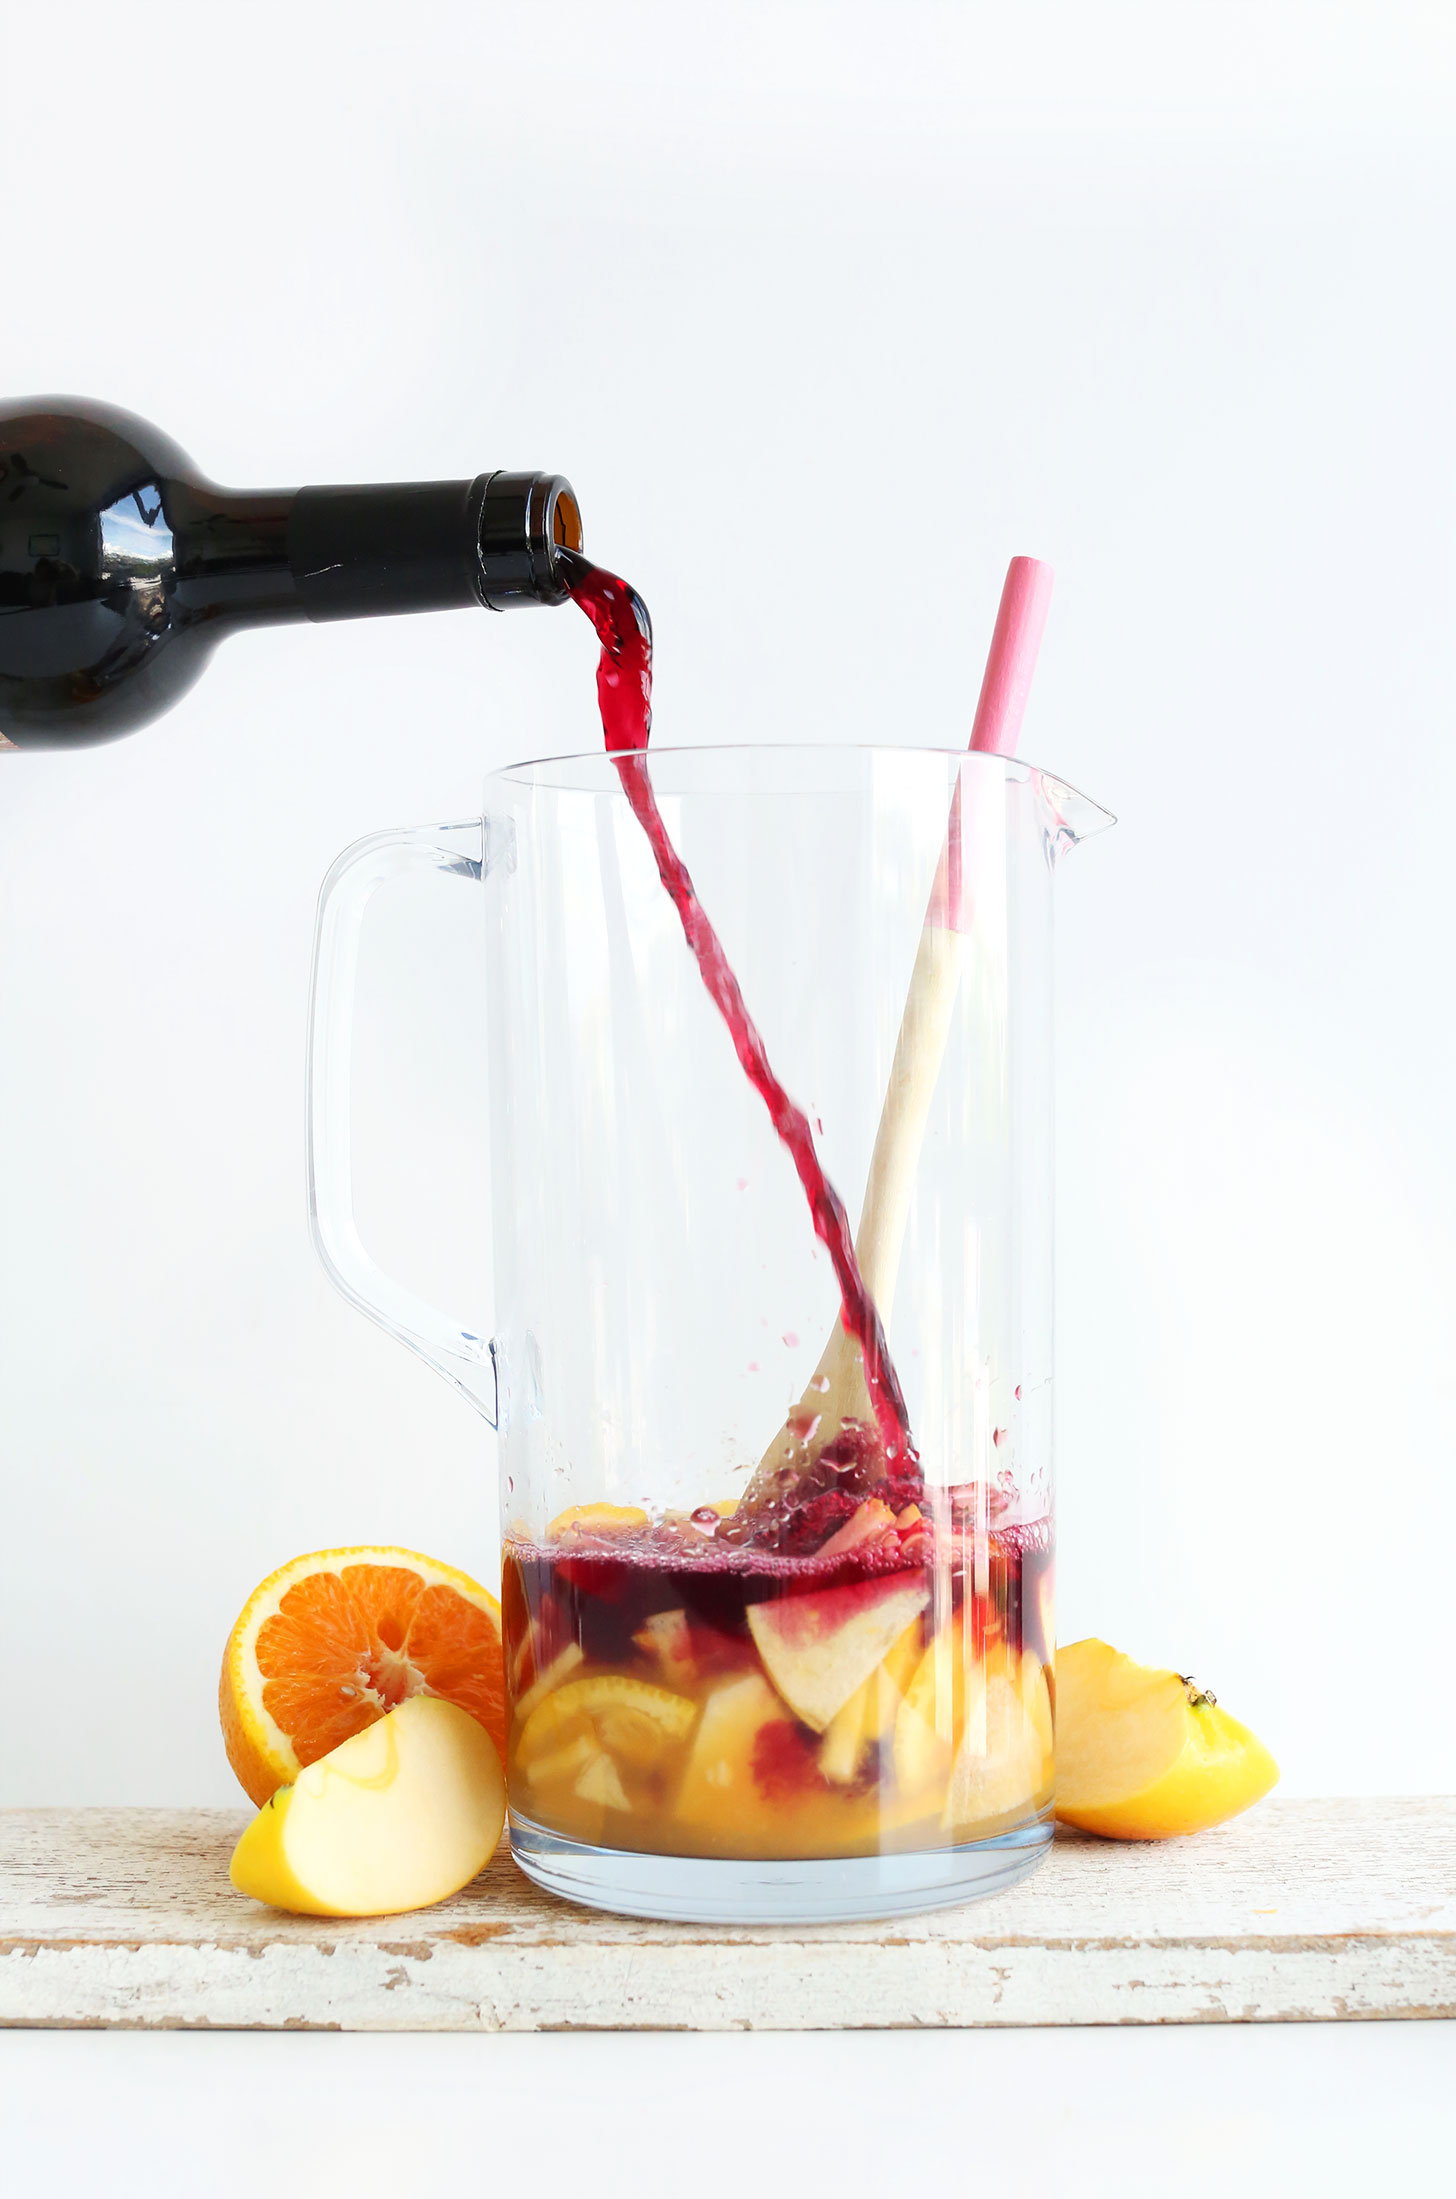 Pouring red wine into a pitcher for our homemade Traditional Red Sangria recipe